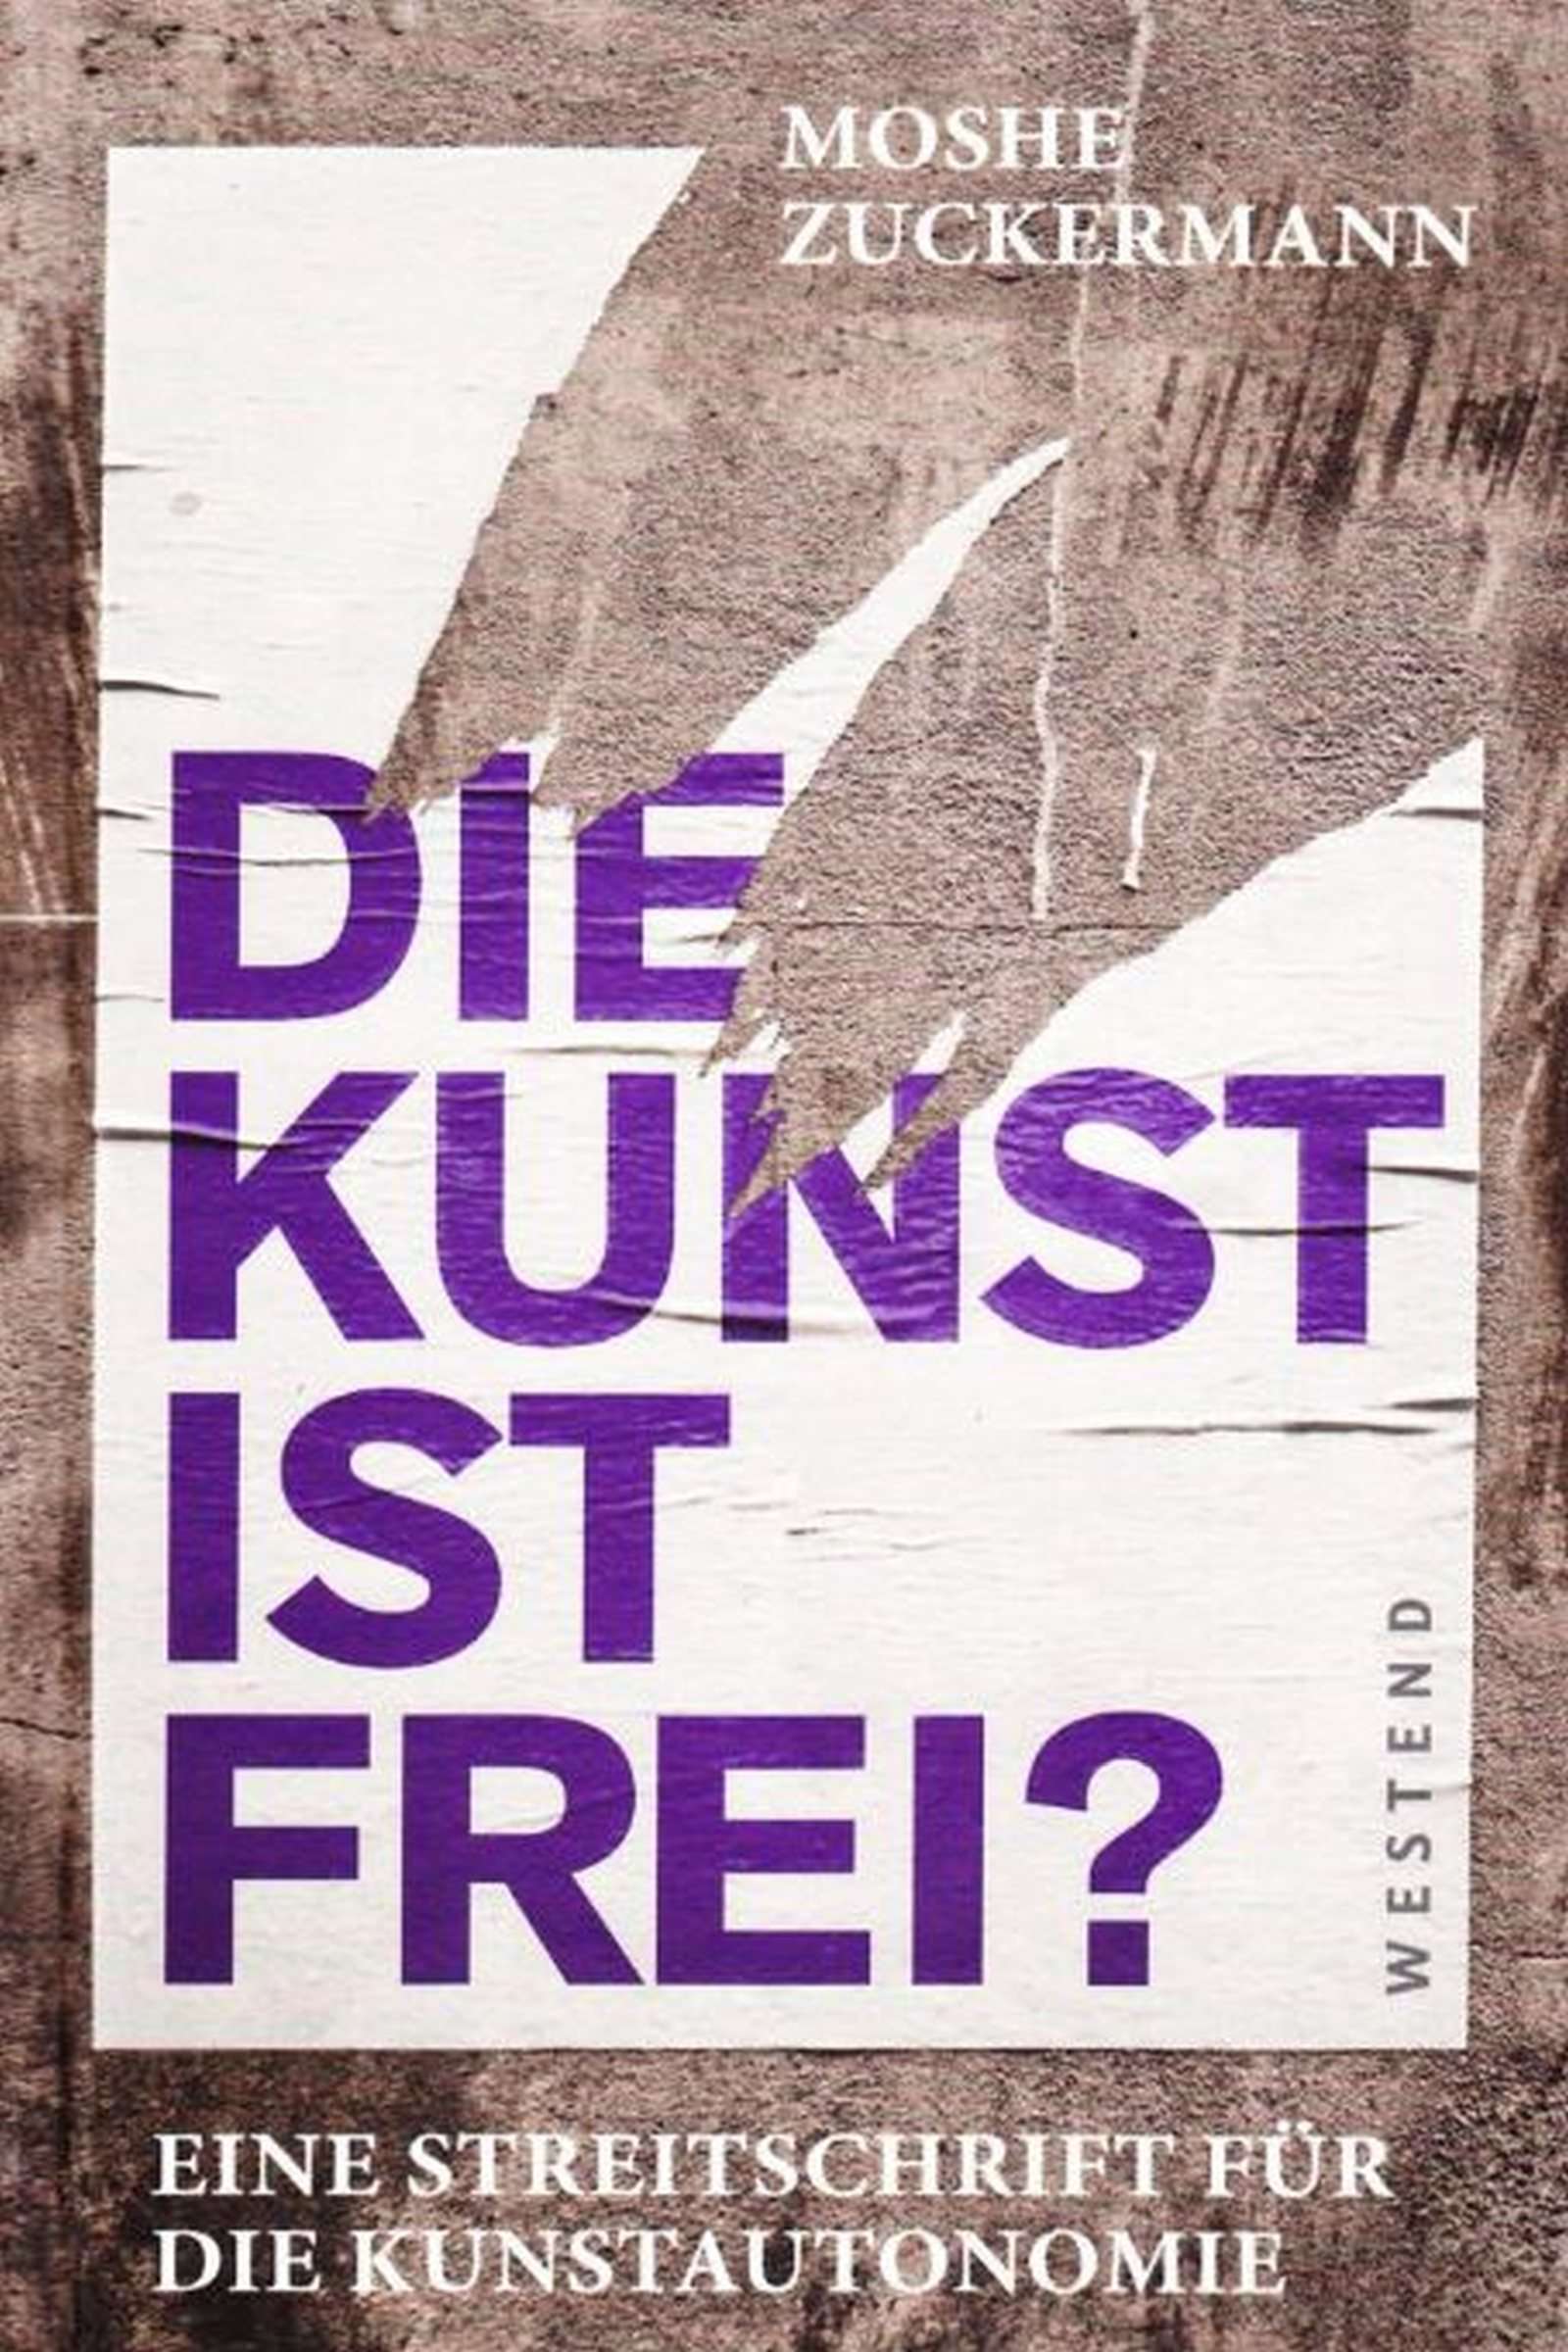 You are currently viewing Die Kunst ist frei?